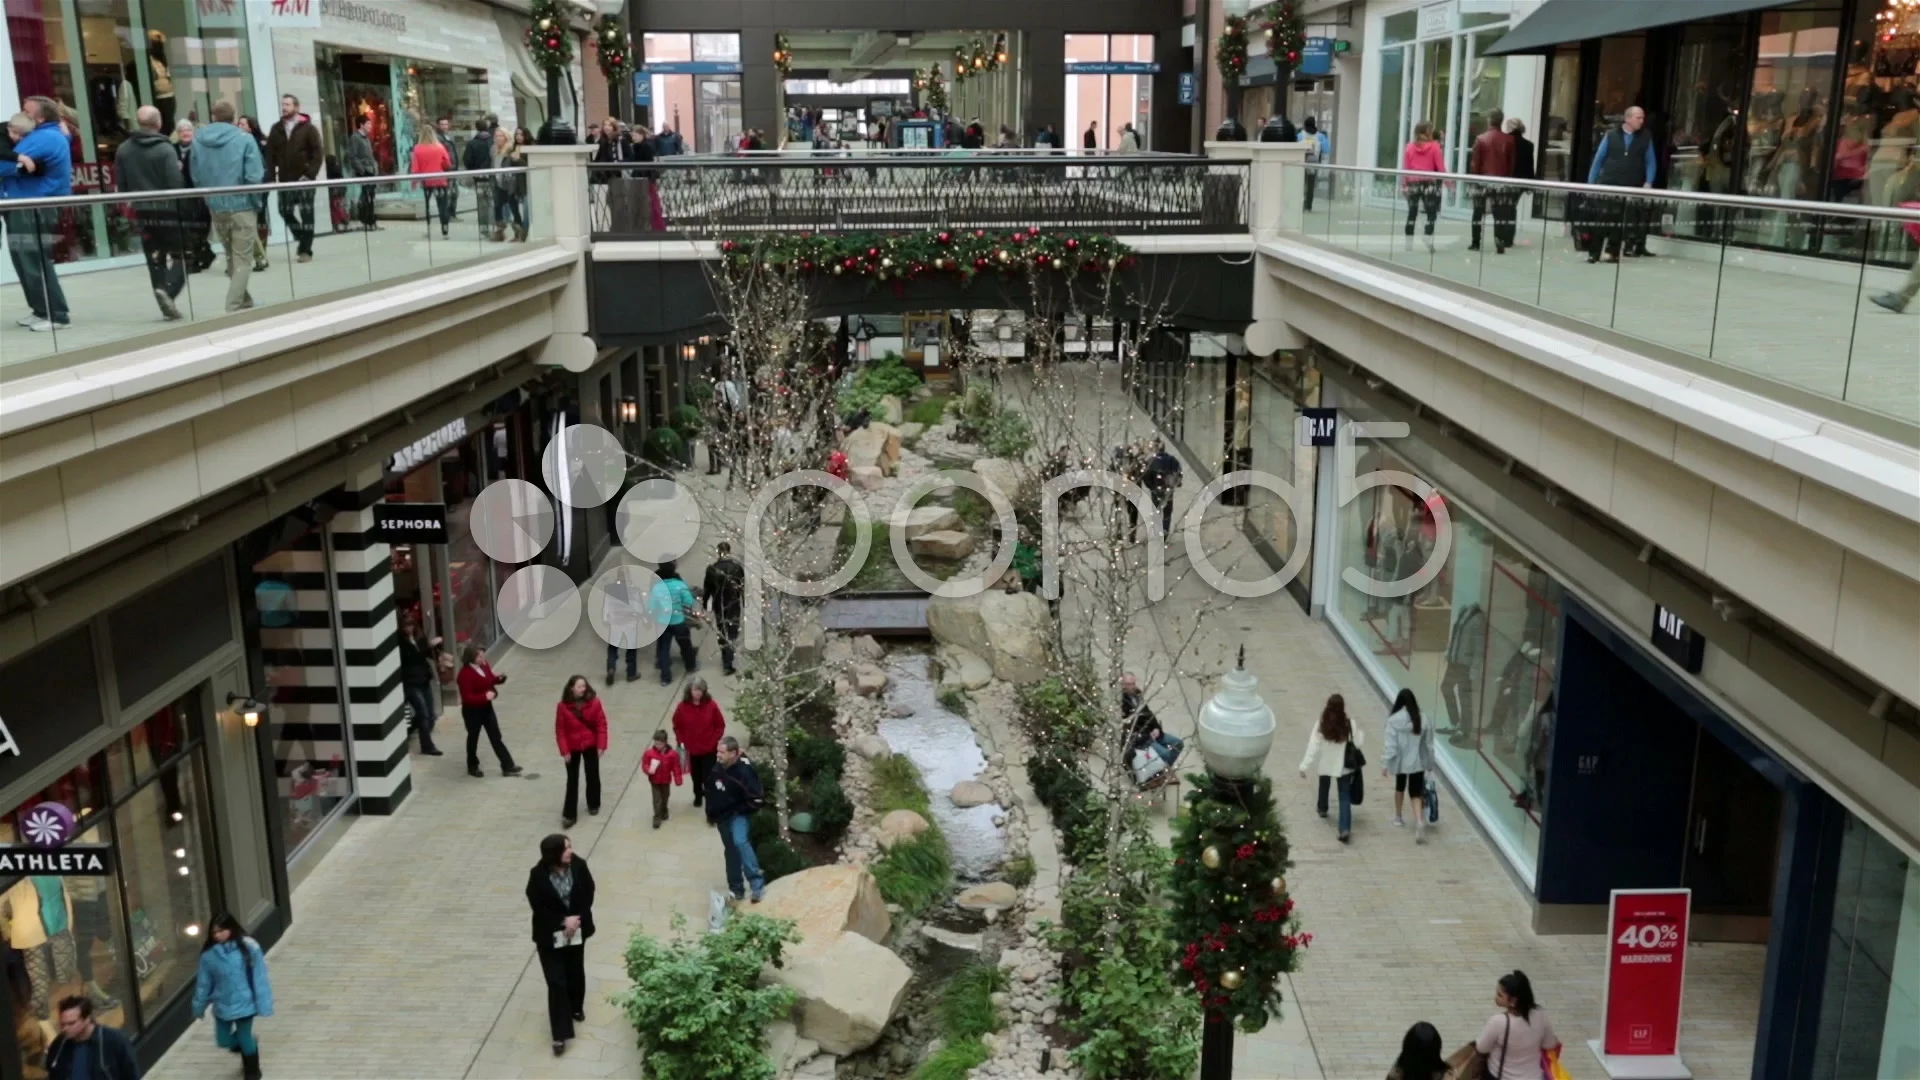 Garden State Plaza Mall to Transition to Mixed Use Property: 550